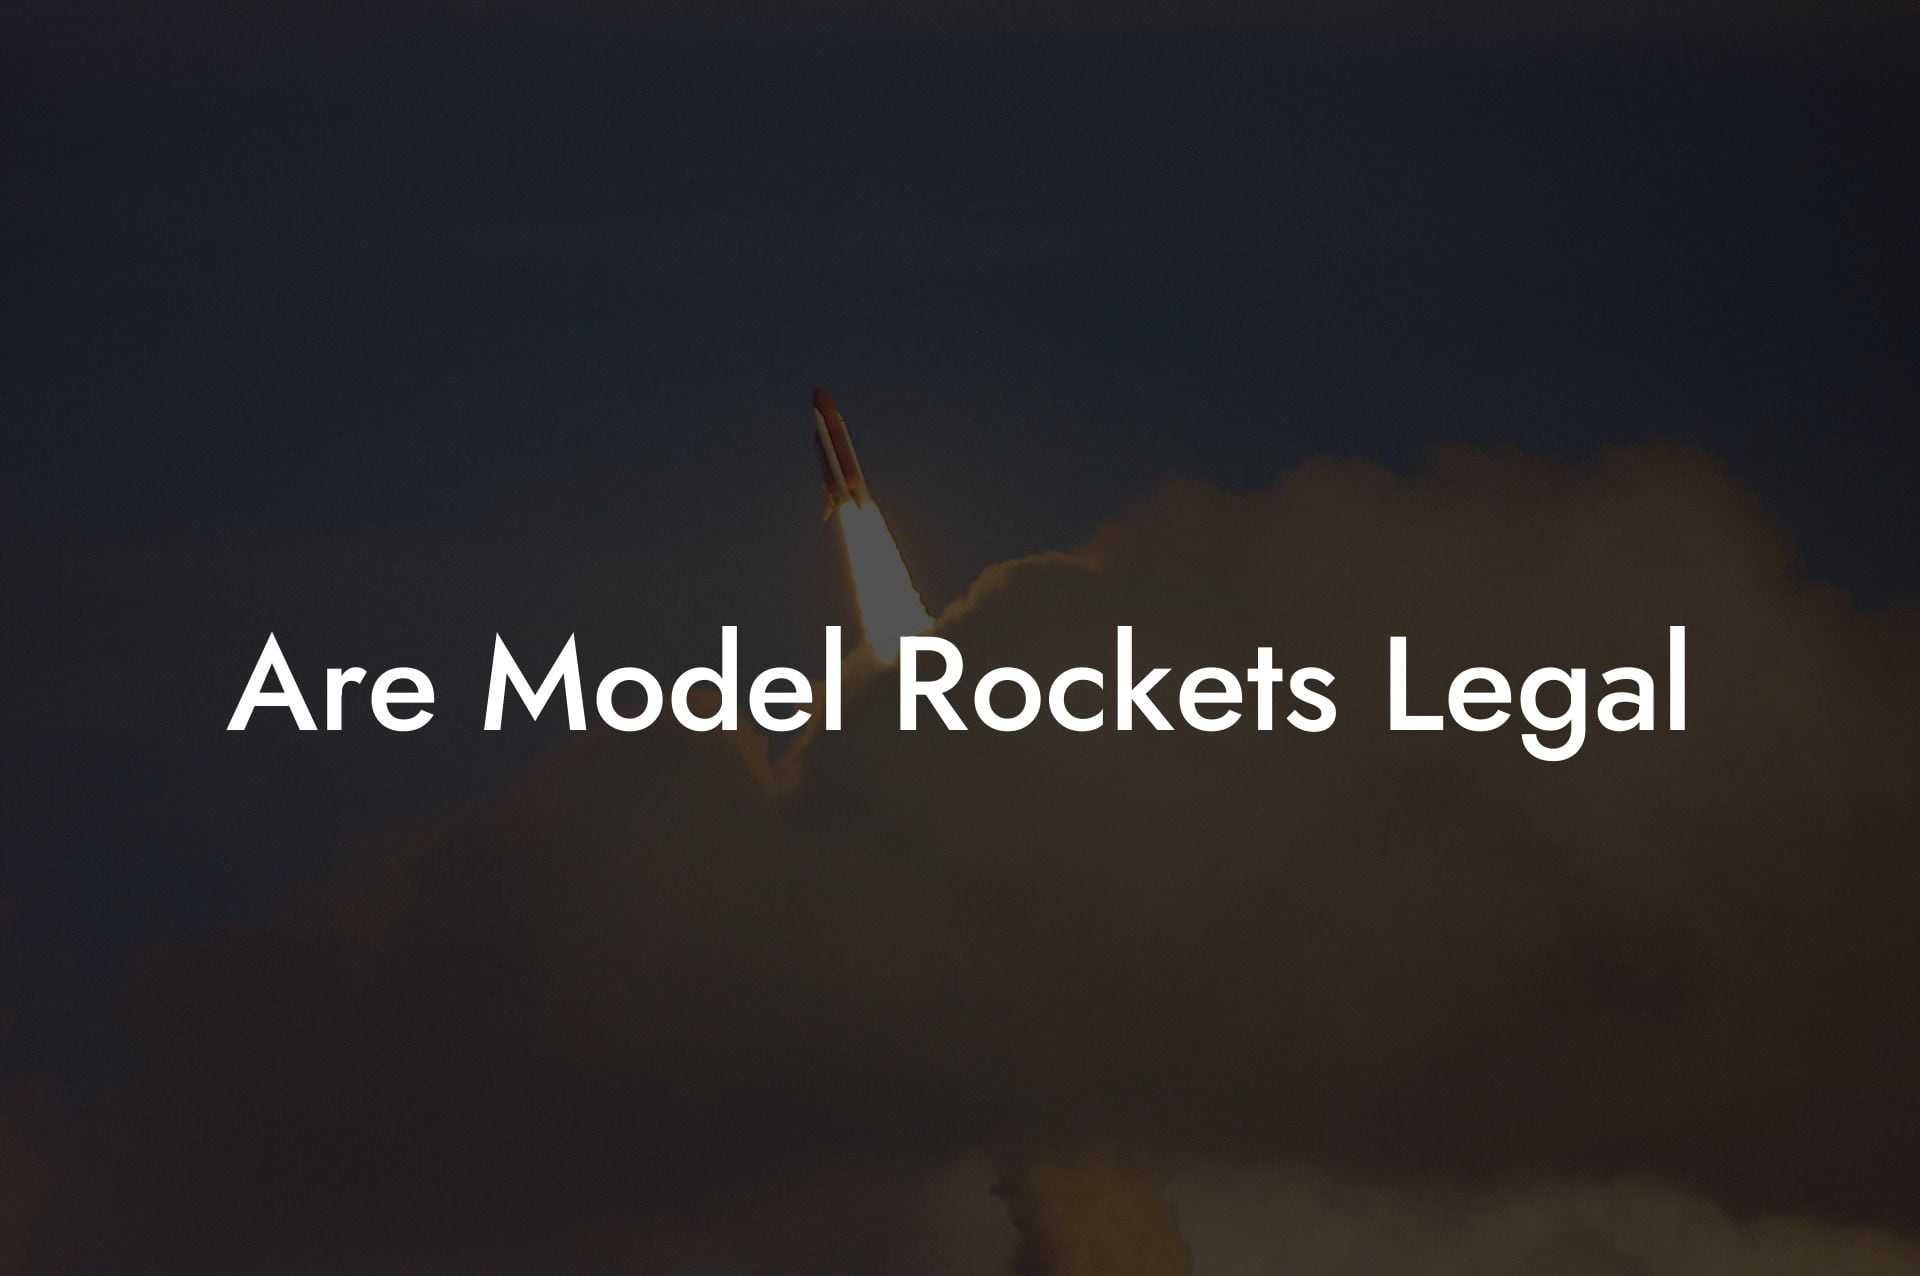 Are Model Rockets Legal